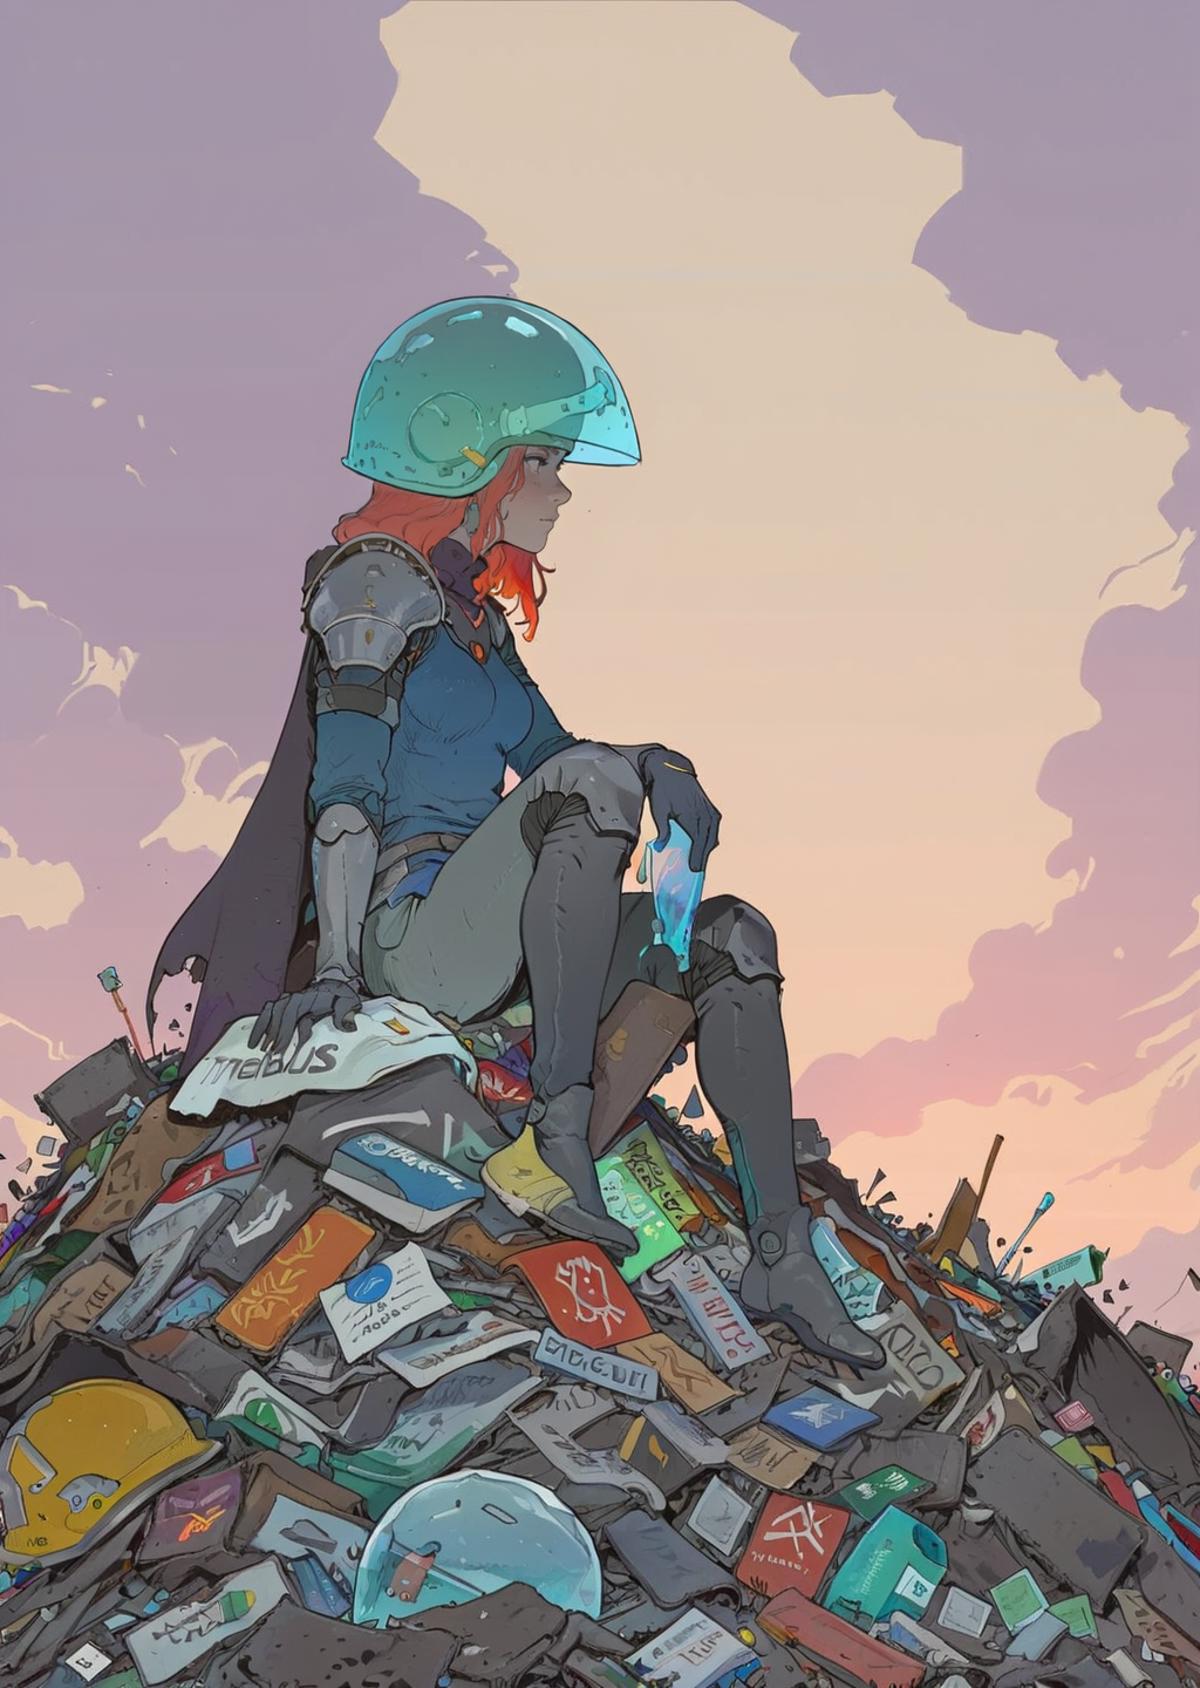 A girl wearing a blue helmet sits on top of a pile of books and magazines.